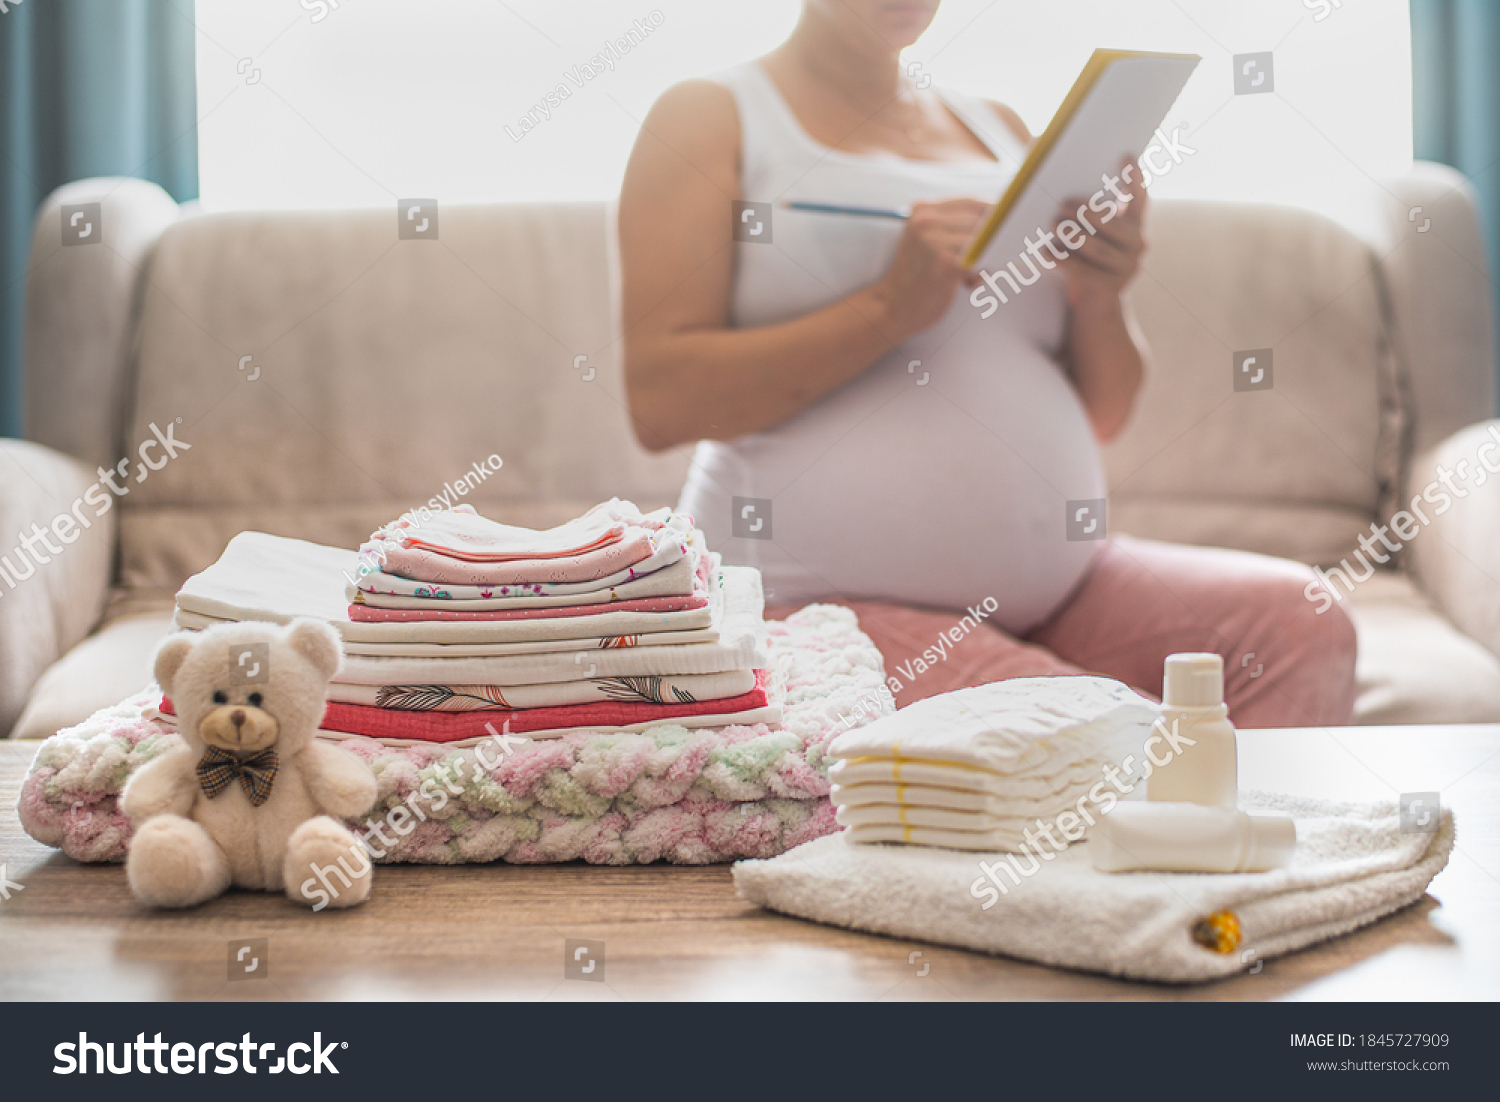 Pregnant woman is getting ready for the maternity hospital, packing baby stuff. pregnant woman preparing and planning baby clothes.  List of things in the hospital.   #1845727909